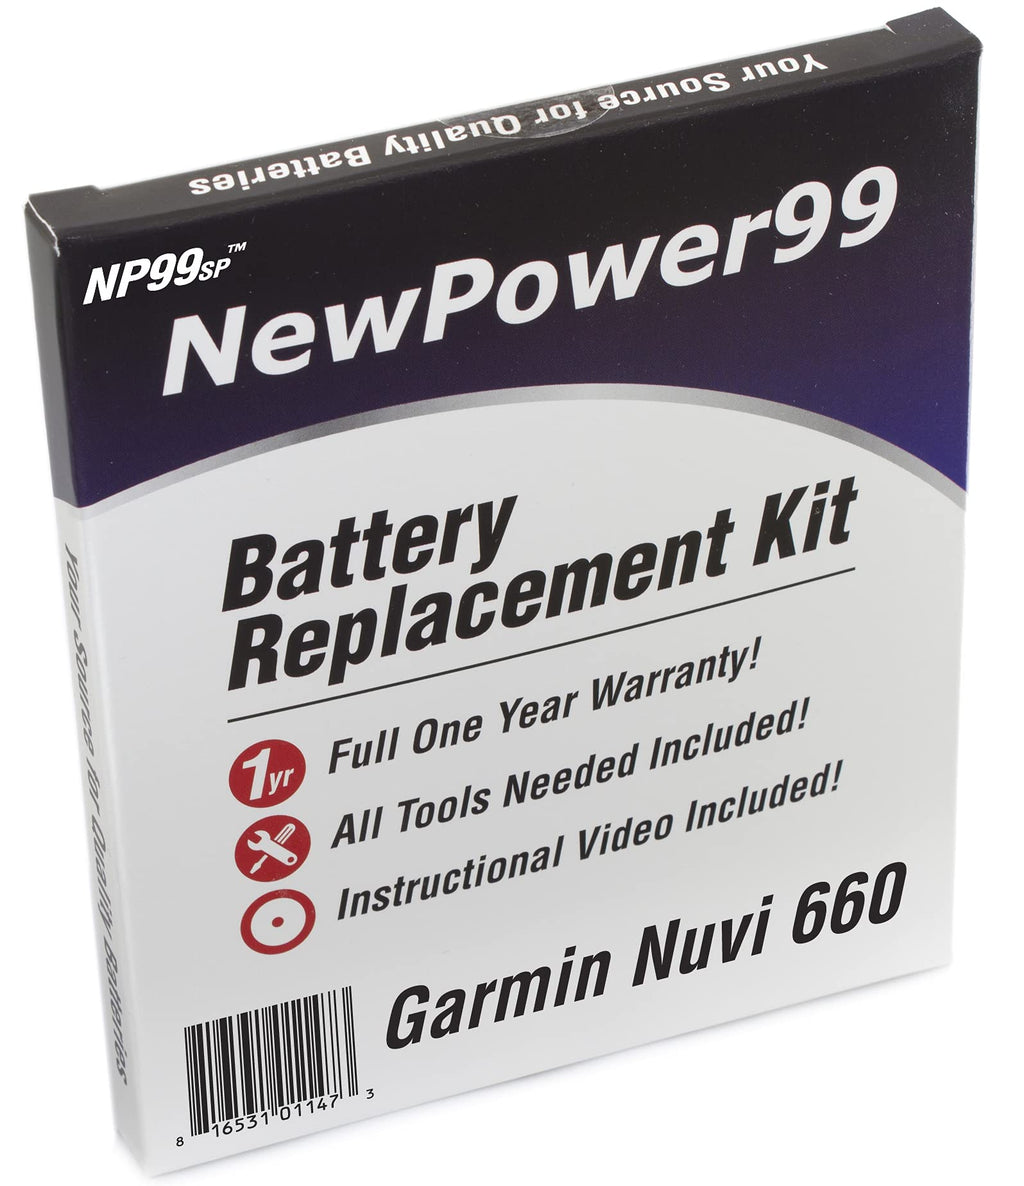 Battery Kit for Garmin Nuvi 660 with Tools, How-to Video, and Battery from